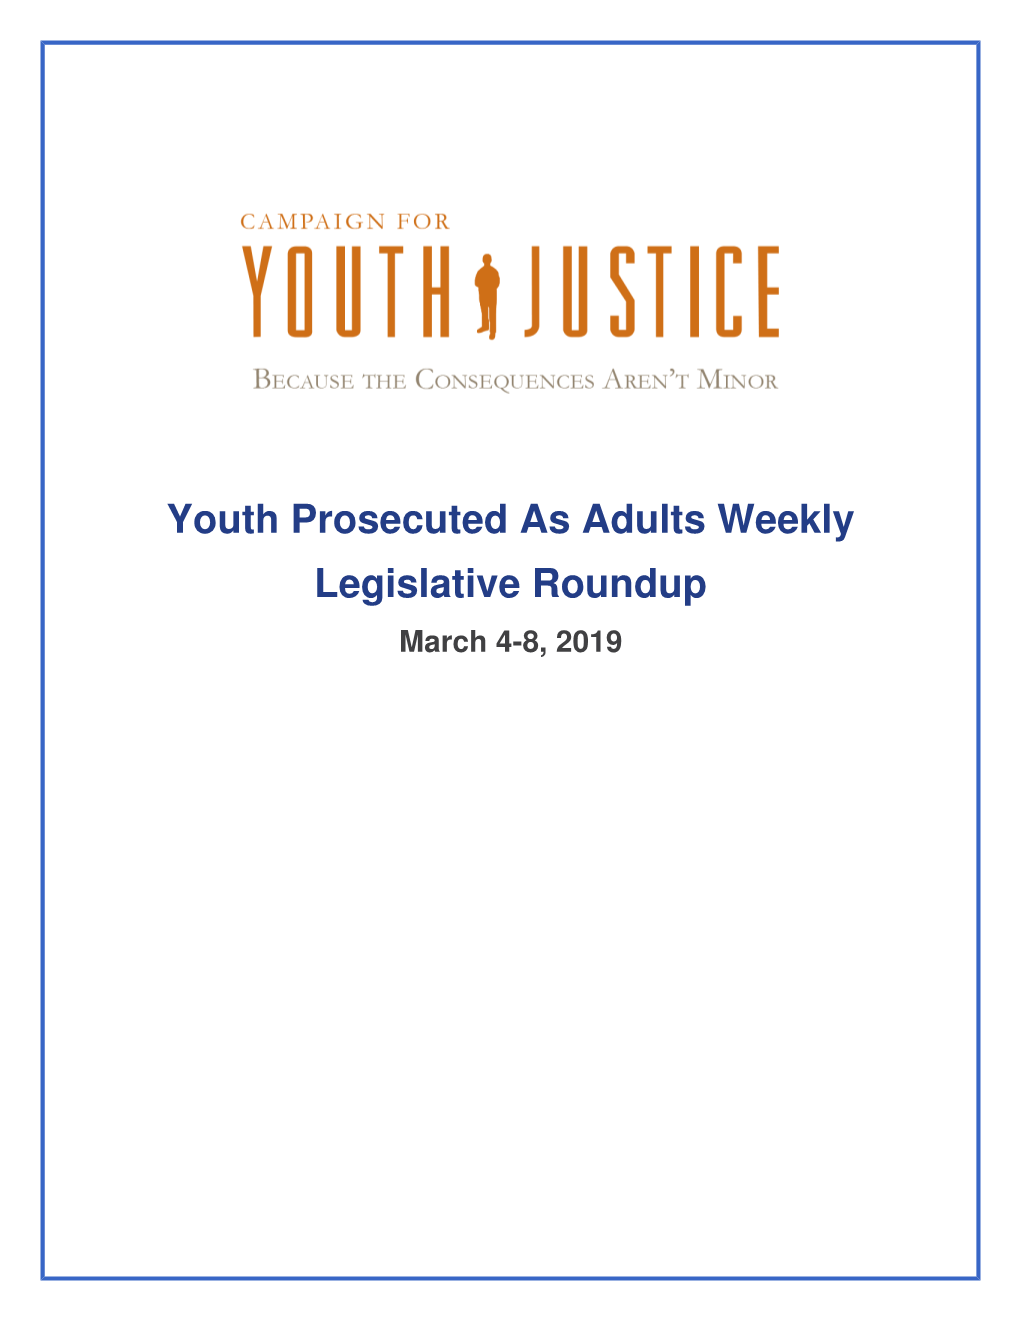 Youth Prosecuted As Adults Weekly